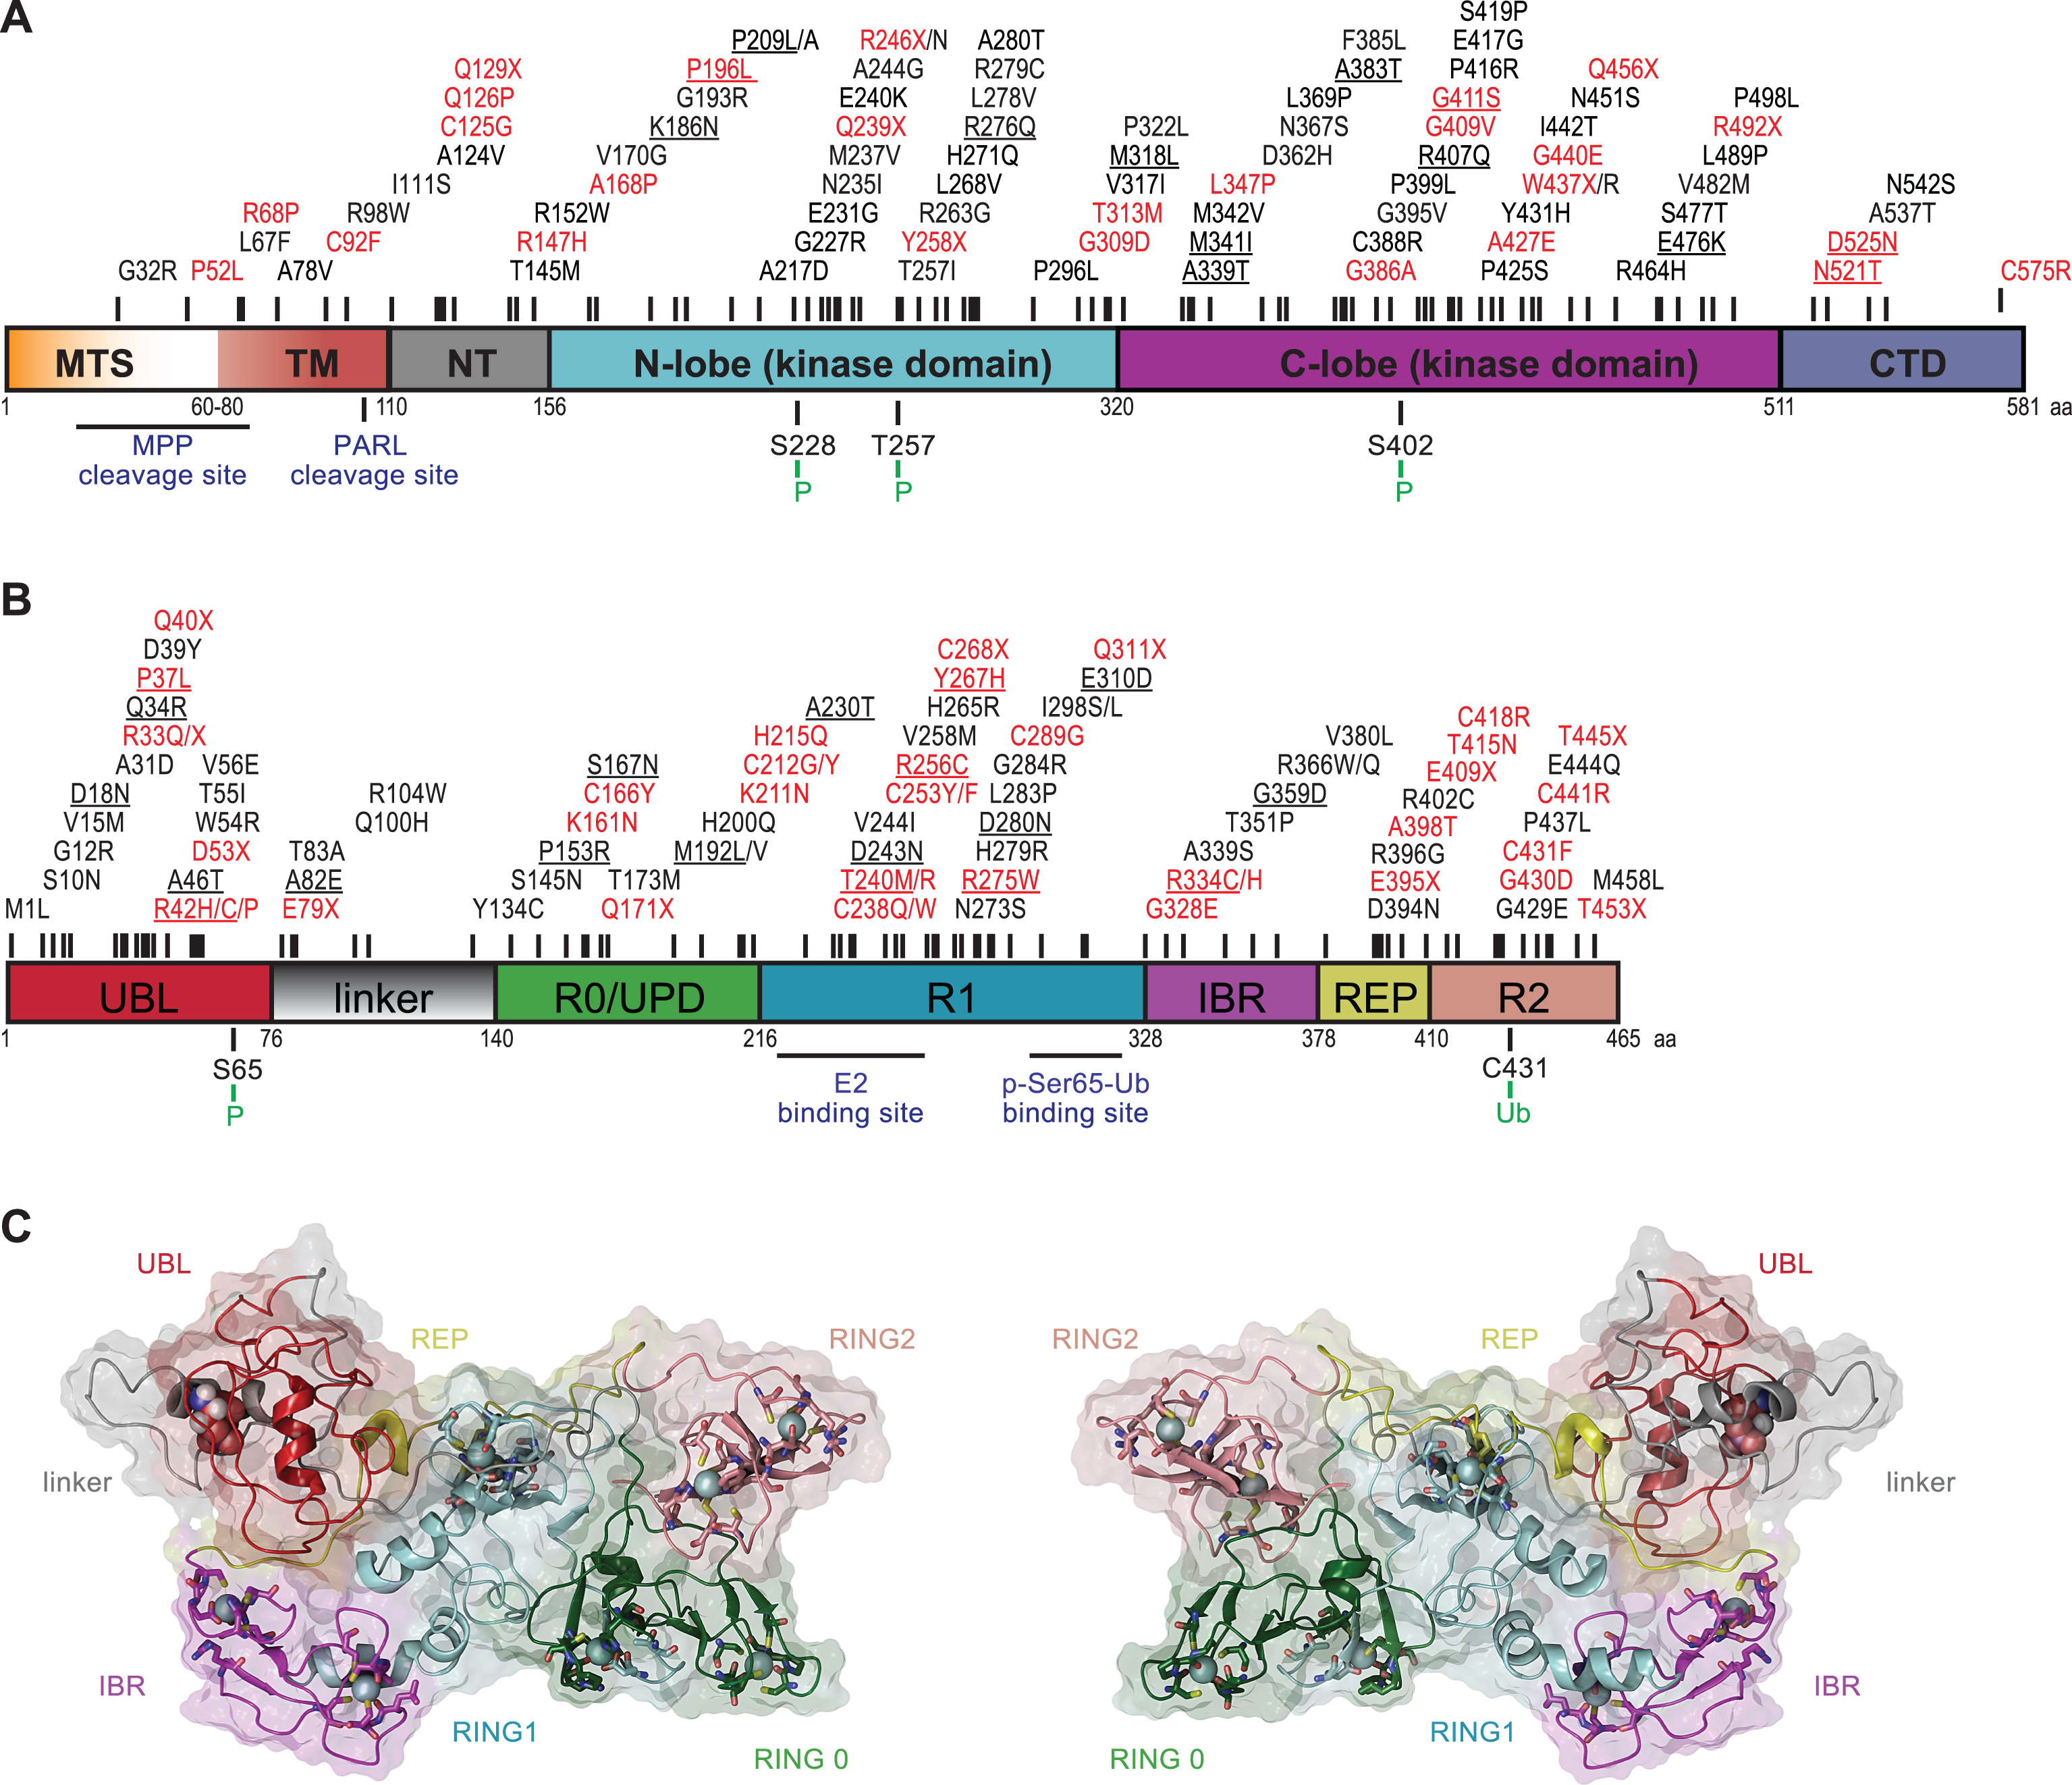 PINK1 and Parkin domain structures and PD-related mutations. (A-B) Given are schematic, color-coded domain representations of PINK1 and Parkin. PD-associated missense and nonsense mutations from the PD Mutation Database (http://www.molgen.vib-ua.be/PDMutDB/) are displayed on top of each structure with their respective locations. Mutations in red have been experimentally verified as loss-of-function mutations and are considered pathogenic, while functional defects for variants shown in black remain unclear. Underlined mutations are common variants based on the ExAC database (http://exac.broadinstitute.org) with allele frequencies greater than 1:10 000. (A) Domain structure of PINK1 (581 amino acids): mitochondrial targeting sequence (MTS, orange), transmembrane region (TM, red), N-terminal regulatory region (NT, gray), N-lobe of the kinase domain (cyan), C-lobe of the kinase domain (purple) and the C-terminal domain (CTD, blue). PD-associated mutations are listed on the top. Mitochondrial protease (MPP and PARL) cleavage sites and PINK1 auto-phosphorylation sites are displayed at the bottom. (B) Domain structure of Parkin (465 amino acids): ubiquitin-like domain (UBL, red), linker (gray), really-interesting-new-gene (RING)/unique Parkin domain (R0/UPD, green), RING1 (R1, cyan), in-between-RING (IBR, purple), repressor element of Parkin (REP, yellow), and RING2 (R2, pink). E2 co-enzyme and p-Ser65-Ub binding sites as well as Ser65 phosphorylation and Cys431 catalytic sites are displayed at the bottom. (C) Closed, inactive conformation of full-length human Parkin (left: front view and right: back view). The structure is shown in colored ribbons that correspond to the respective domain colors. The solvent-accessible surface area of each domain is shown in semi-transparent rendering in the same color. Ser65 is highlighted in Van der Waal representation with standard atom coloring (hydrogen: white, oxygen: red, nitrogen: blue). The zinc-finger motifs of Parkin are rendered in licorice stick with standard atom coloring and the corresponding zinc ions as spheres (cyan).